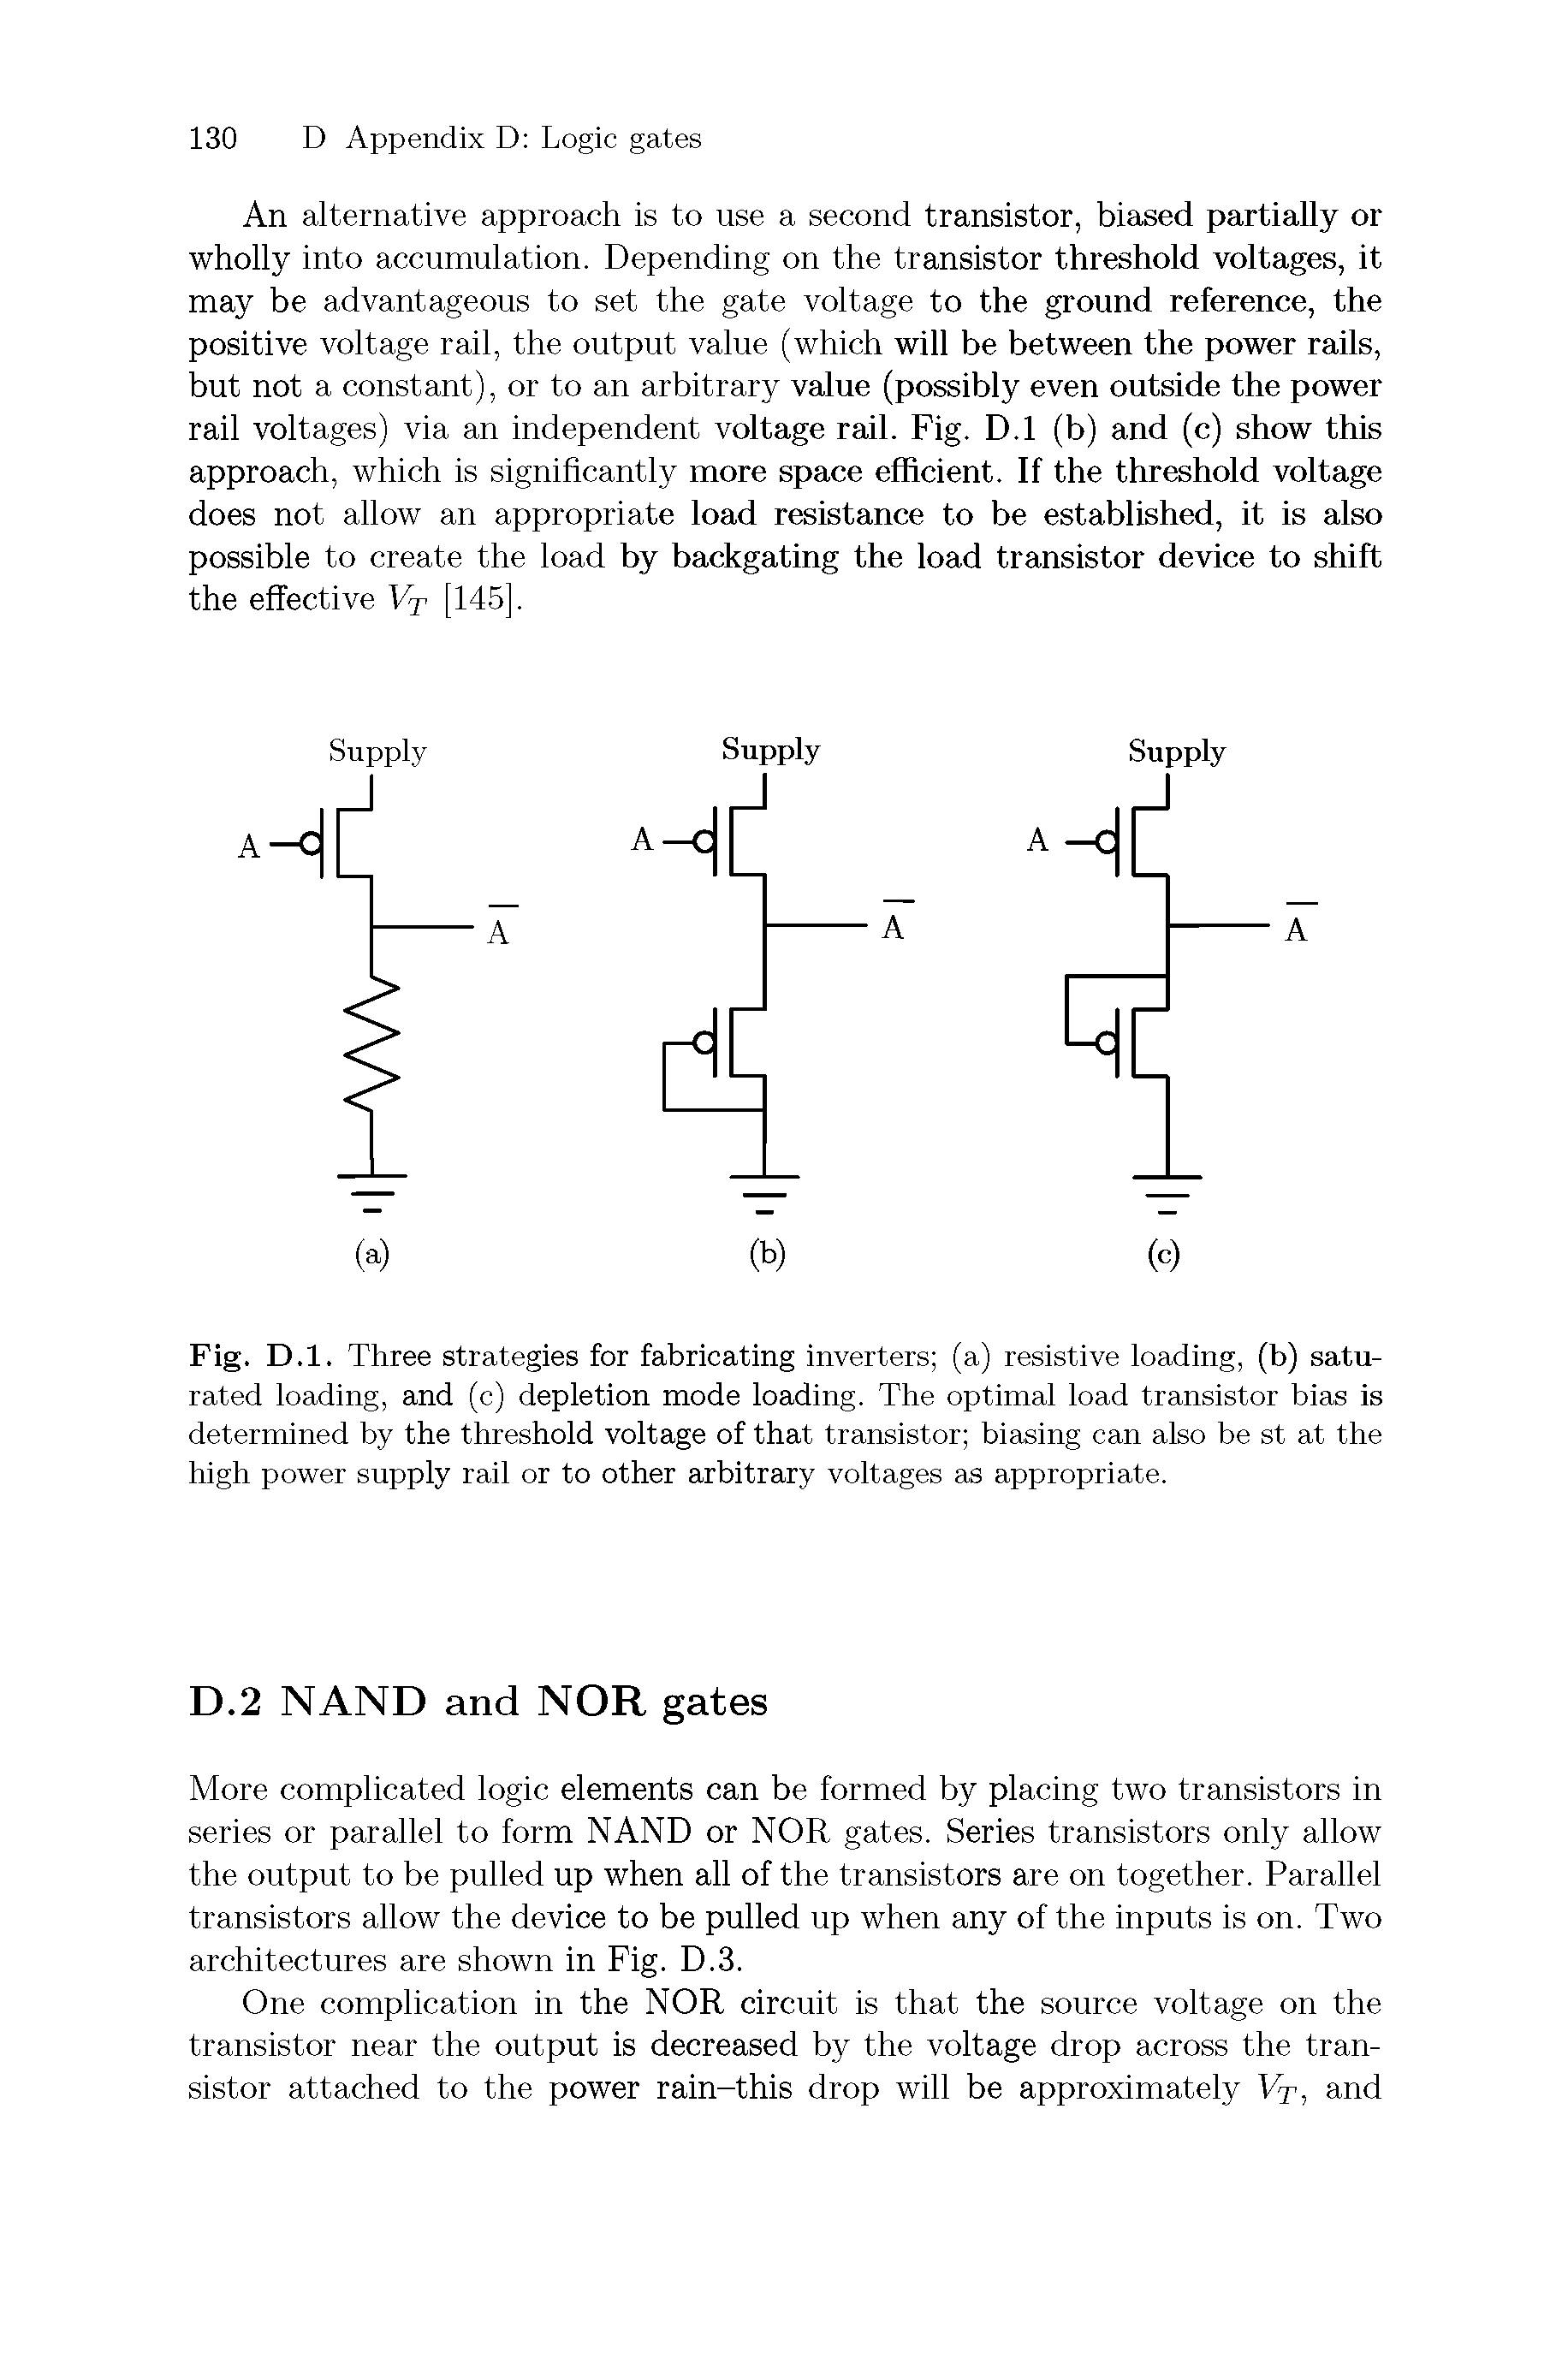 Fig. D.l. Three strategies for fabricating inverters (a) resistive loading, (b) saturated loading, and (c) depletion mode loading. The optimal load transistor bias is determined by the threshold voltage of that transistor biasing can also be st at the high power supply rail or to other arbitrary voltages as appropriate.